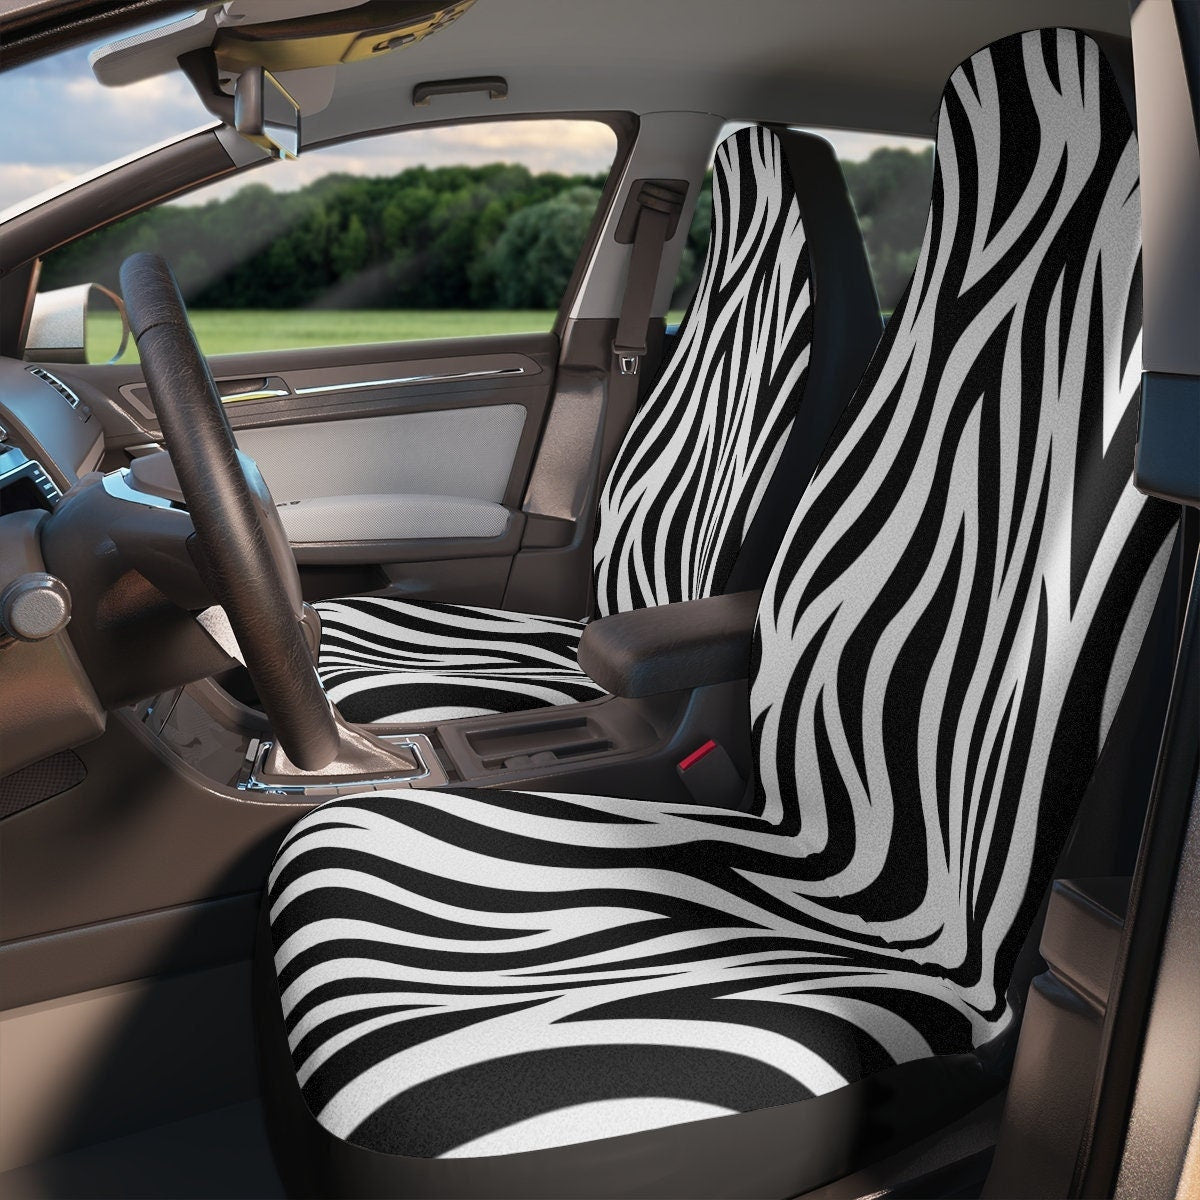 http://hmdesignstudious.com/cdn/shop/products/Seat-Covers-for-Cars-Boho-70s-Car-Seat-Cover-Cute-Car-Accessories-for-Women-Hippie-Car-Decor-Zebra-Groovy-Universal-Vehicle-Chair-Cover-HMDesignStudioUS-647.jpg?v=1700512684